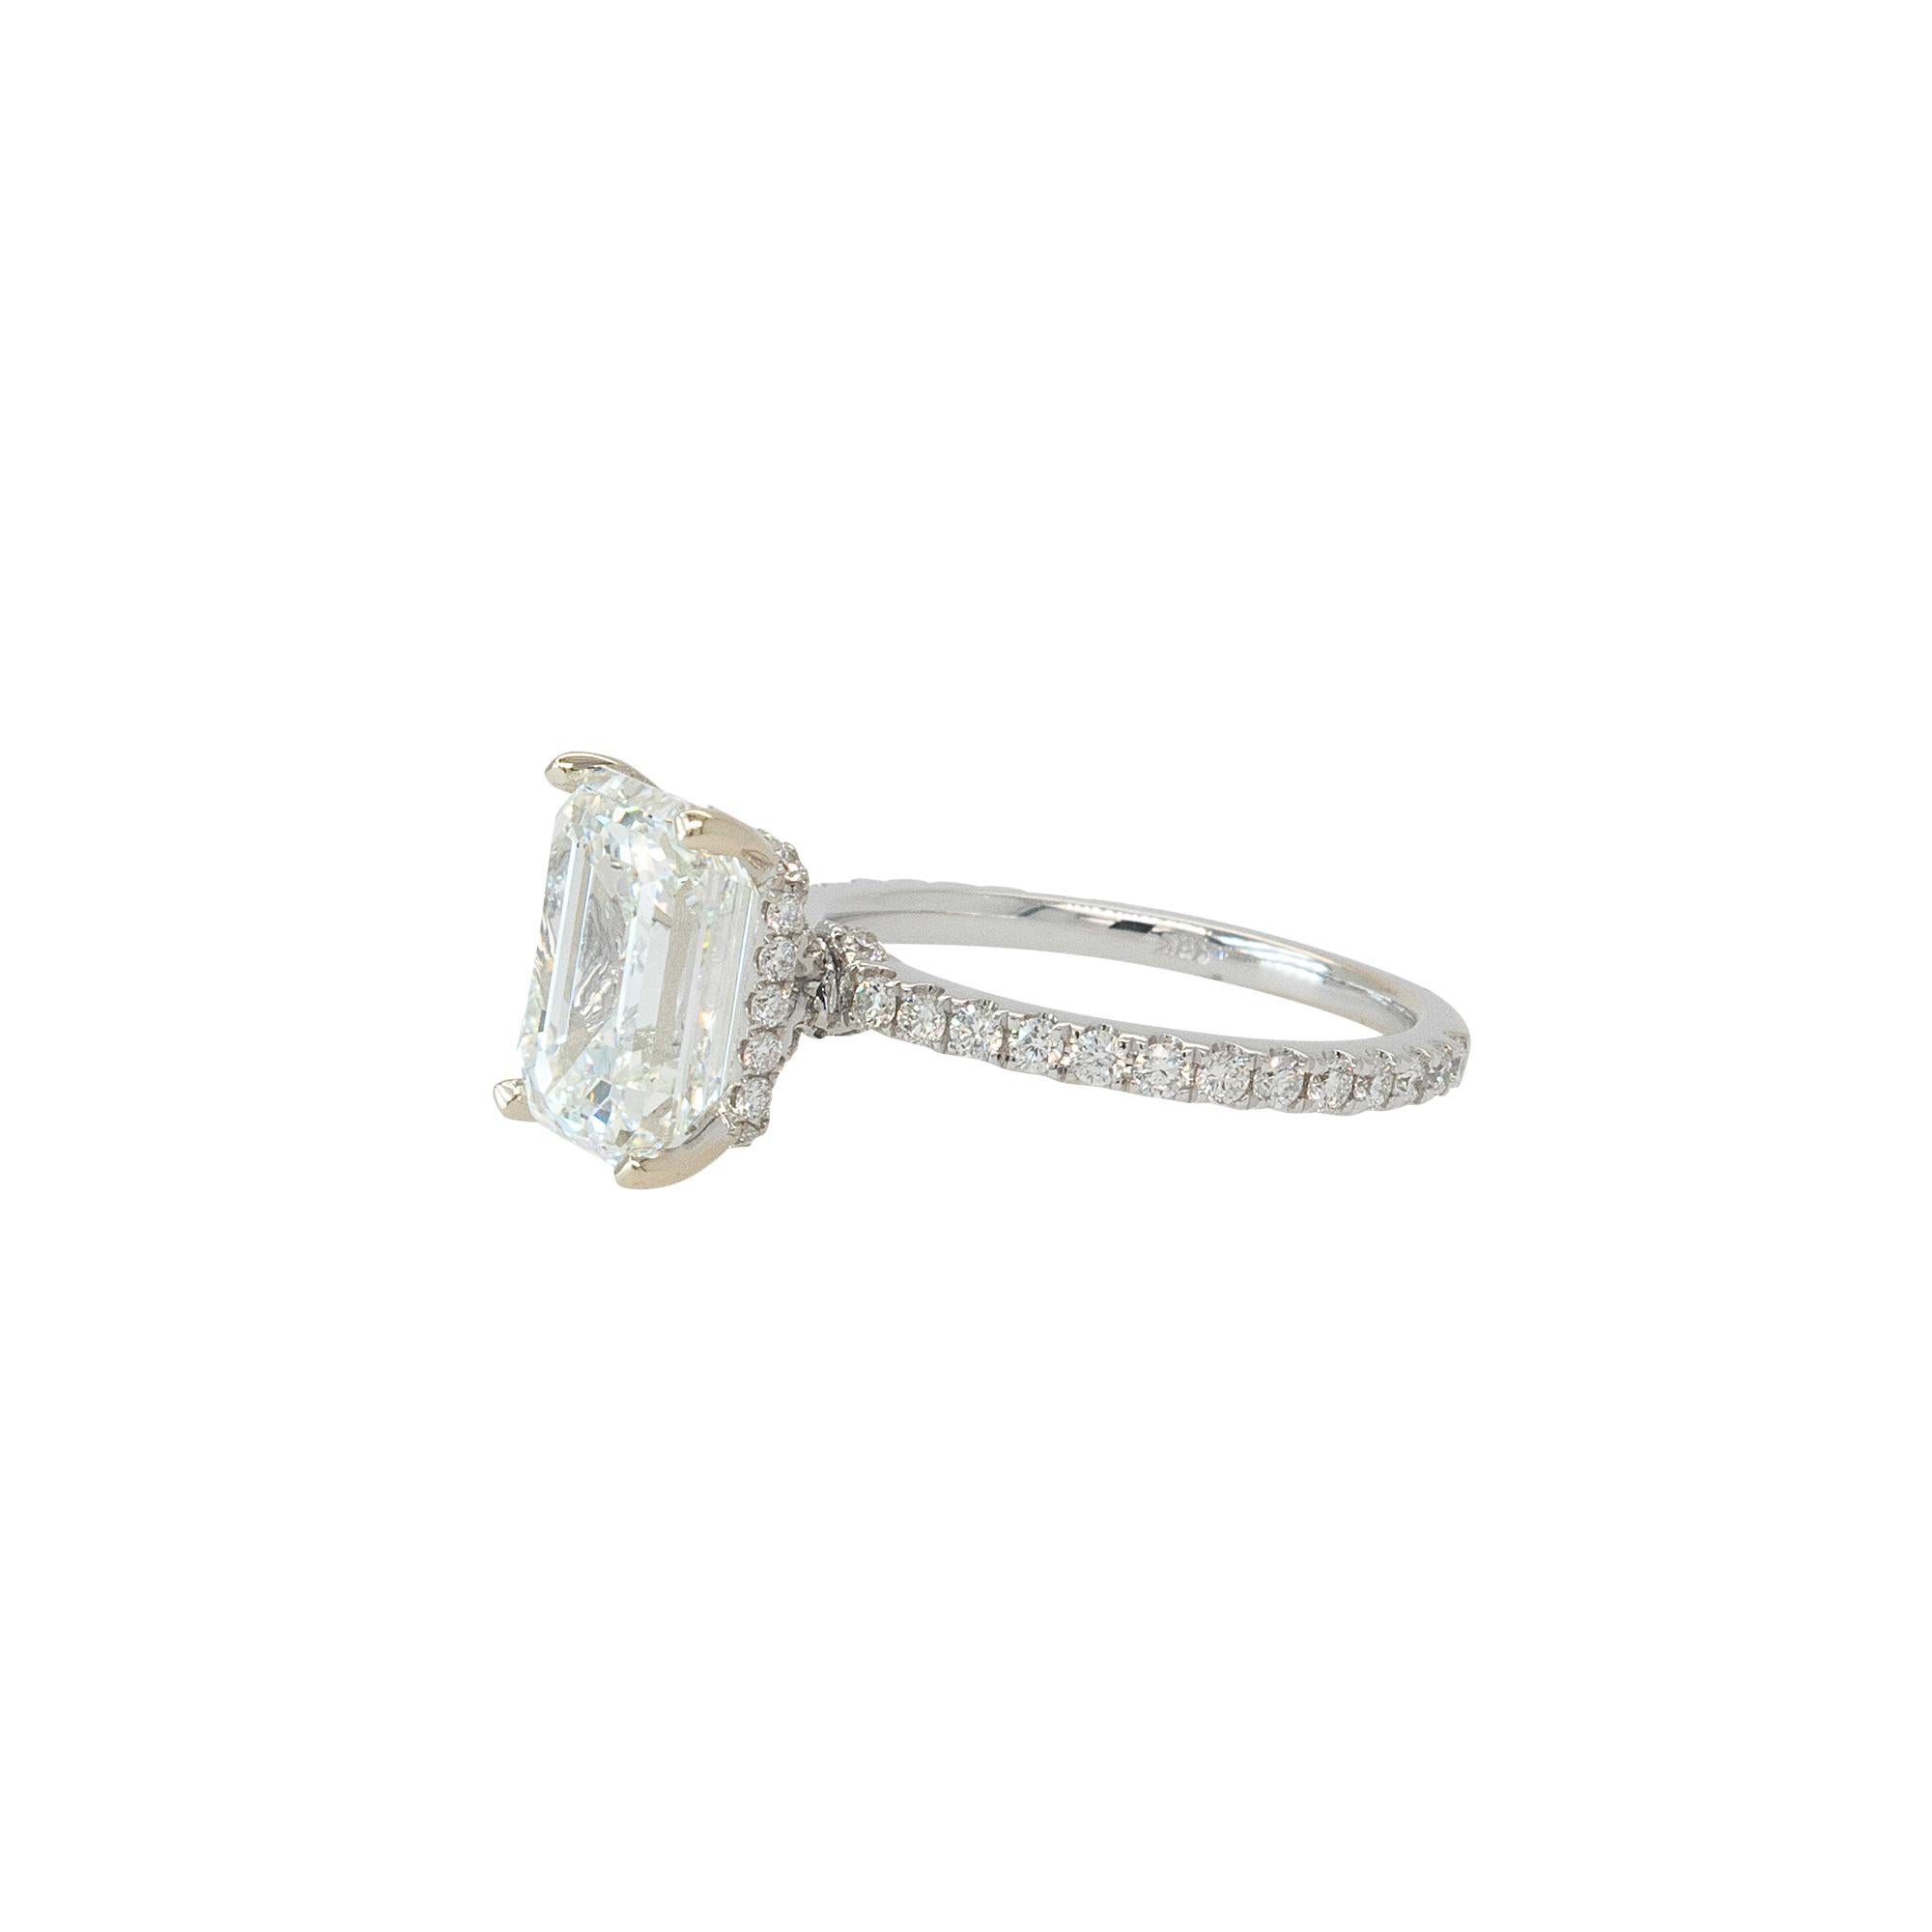 Center Details: 4.02ct Emerald Cut Natural Diamond
I Color VS1 Clarity EC
GIA #6183603790 
10.4mm x 8.0mm x 4.6mm
Ring Material: 18k White Gold Approx 0.62ctw Natural Diamonds
Ring Size: 6.5 (can be sized)
Total Weight: 3.6g (2.3dwt)
This item comes